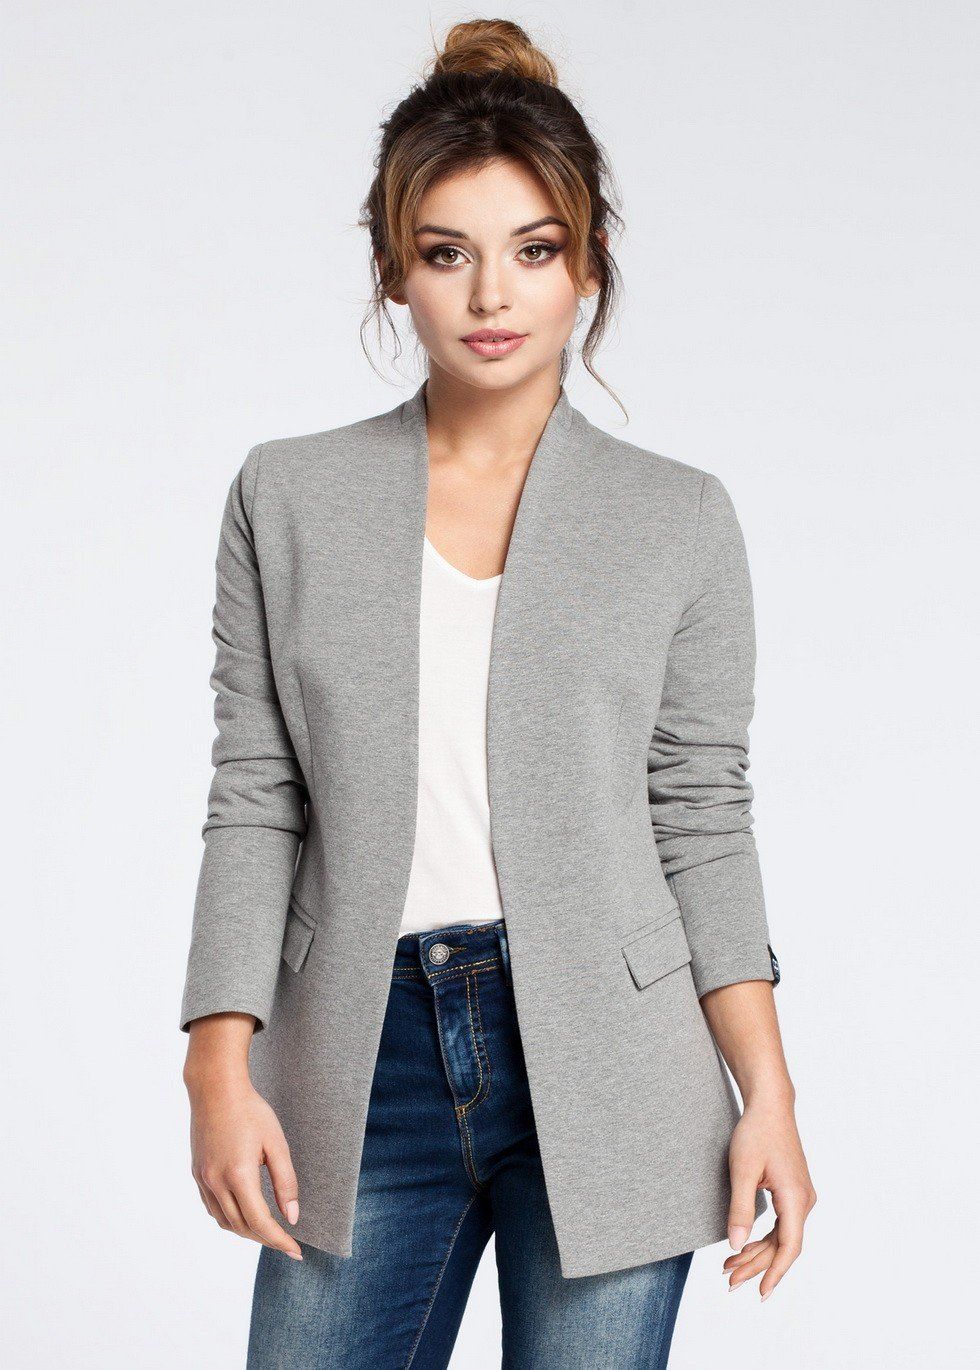 “Beyond the Boardroom: Casual Chic with Blazers”